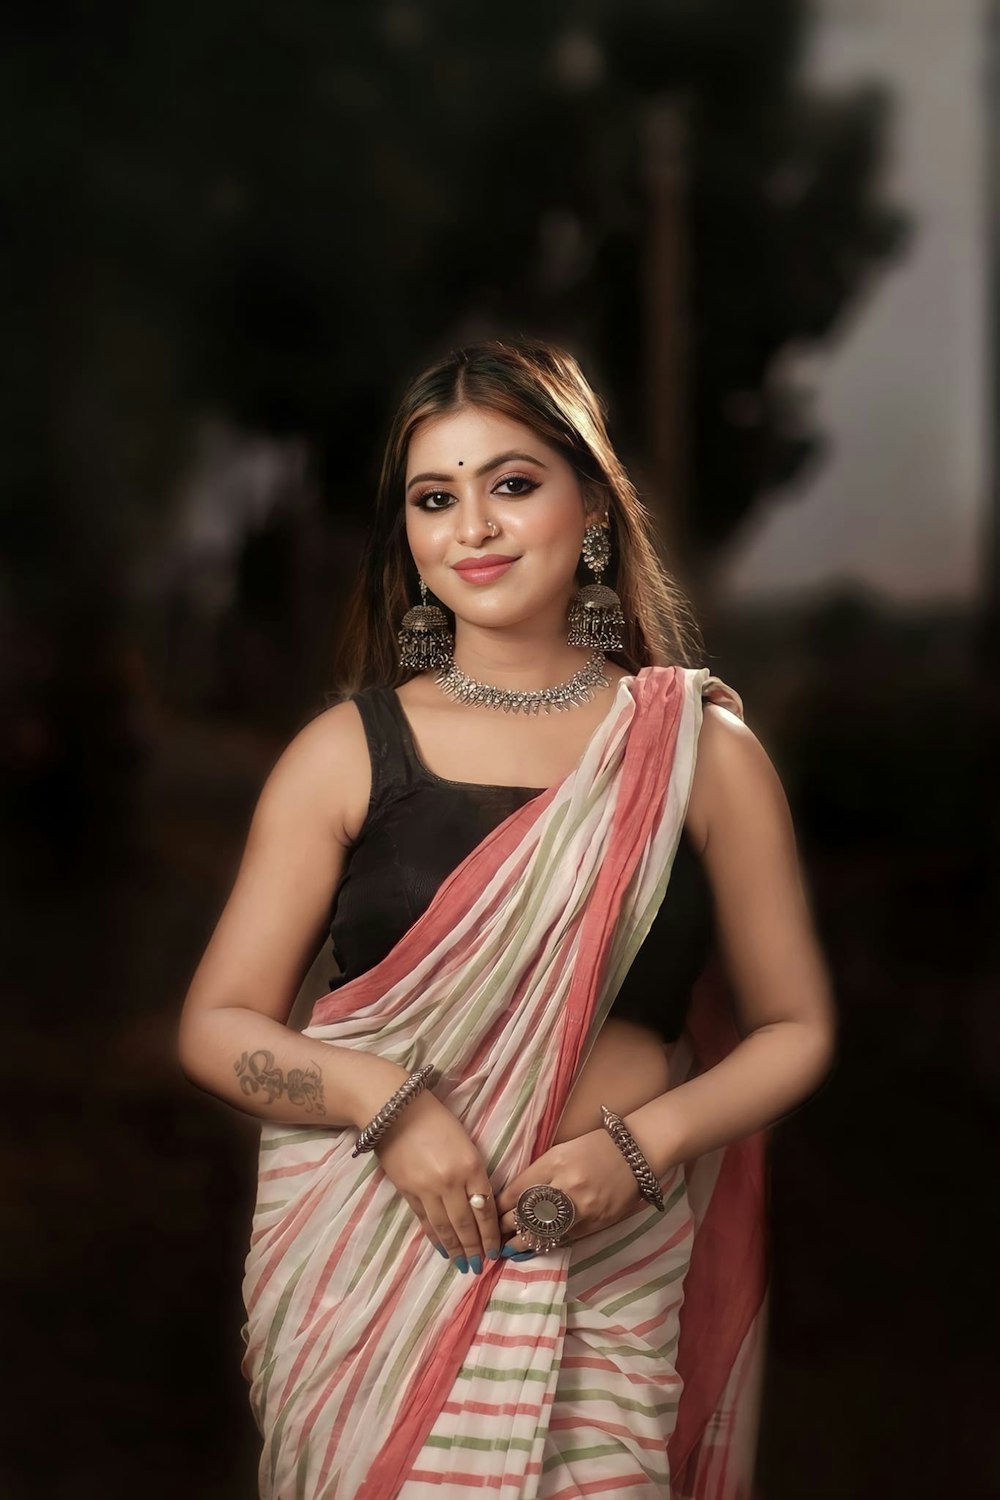 a woman in a sari posing for a picture